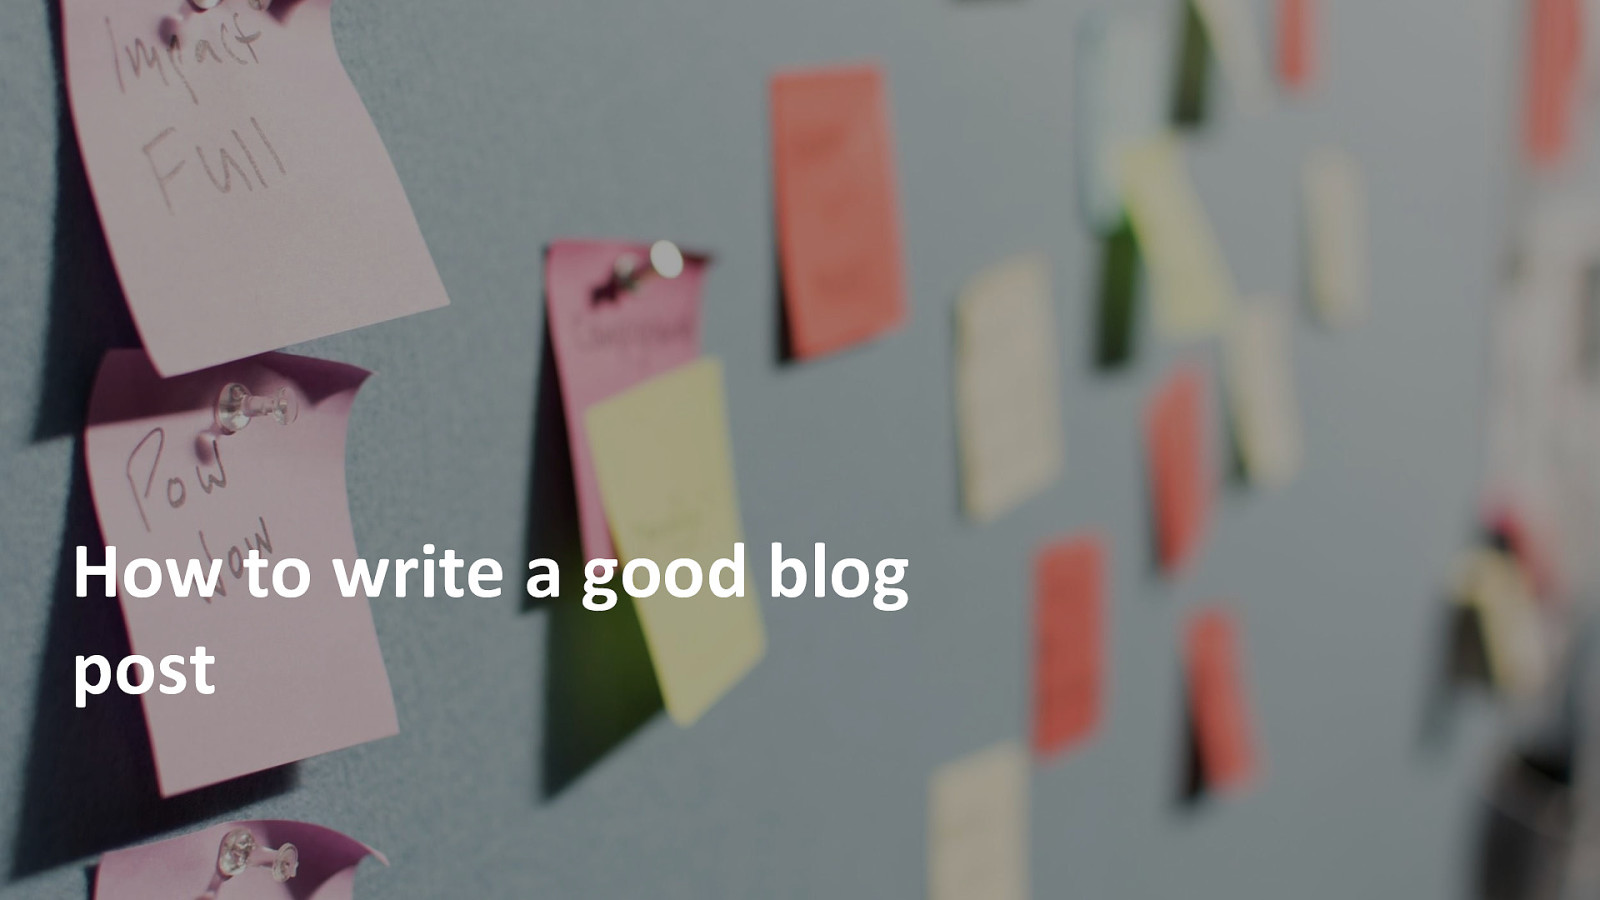 How to write a good blog post